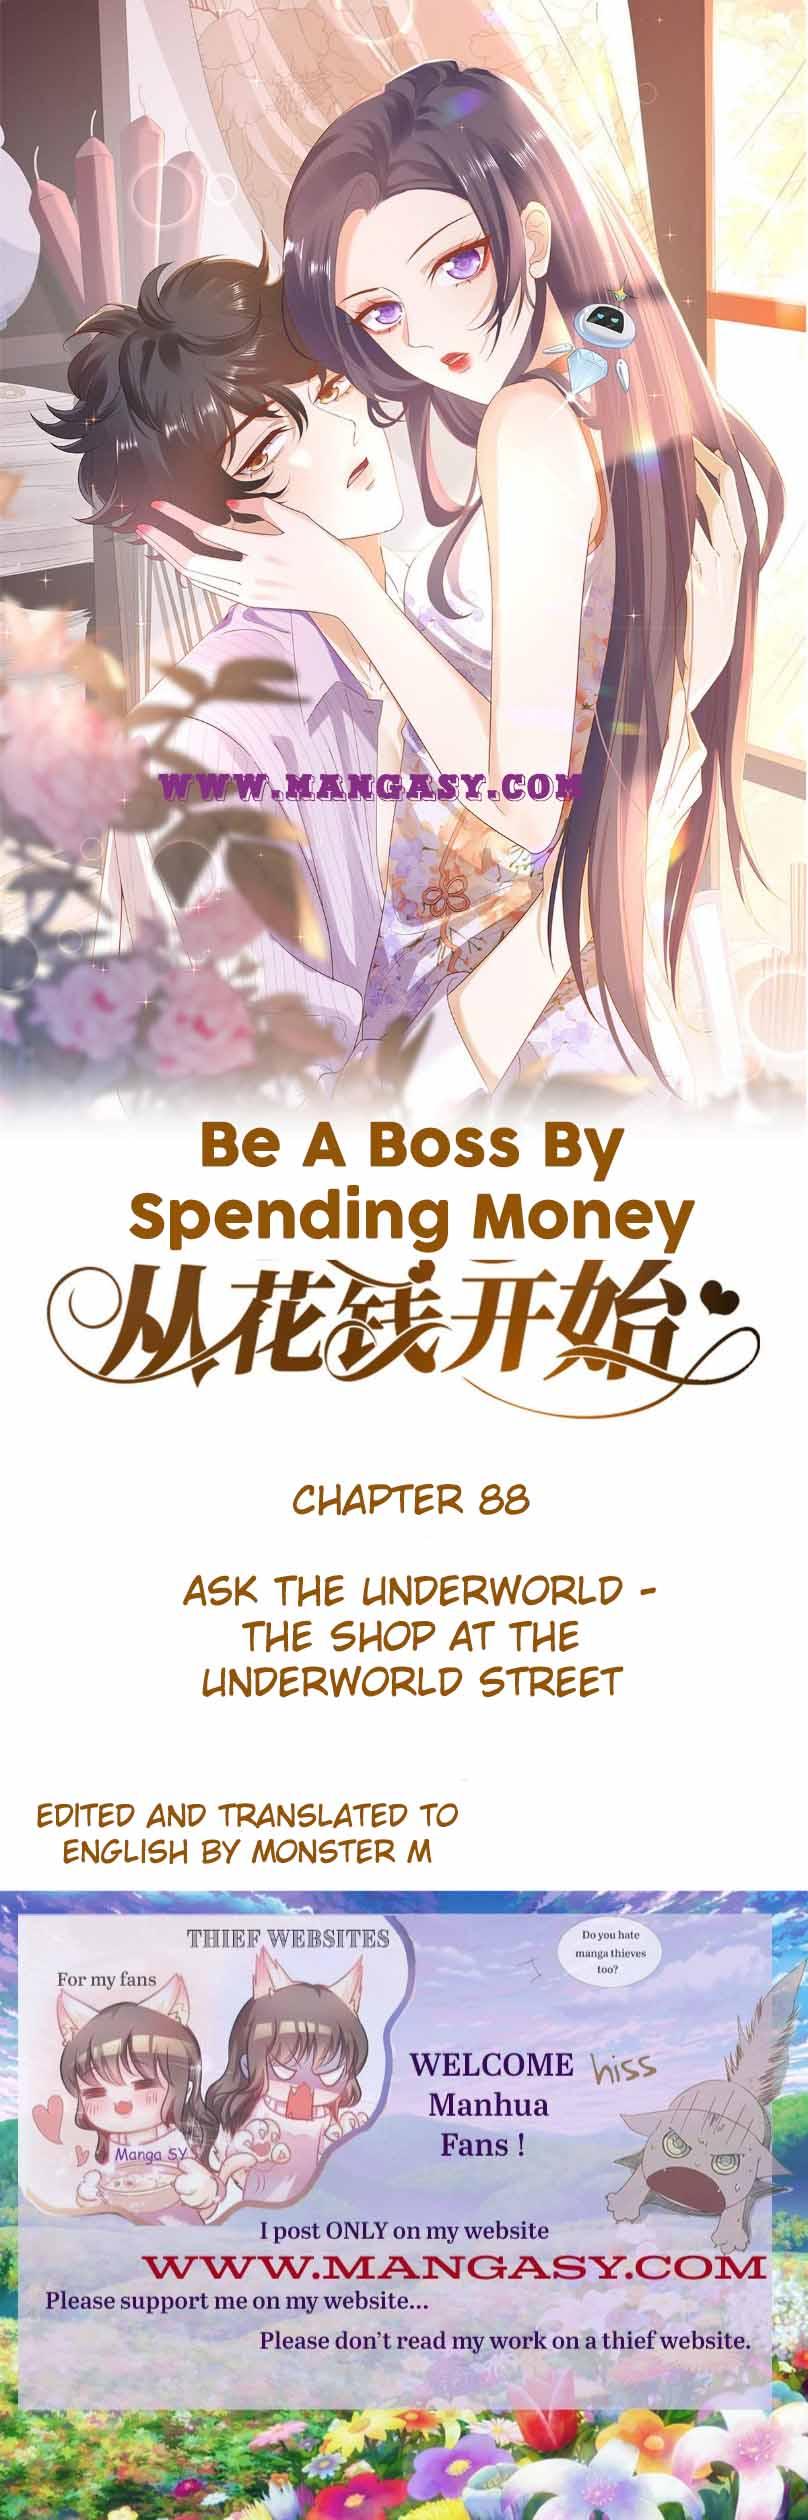 Becoming A Big Boss Starts With Spending Money - Page 1